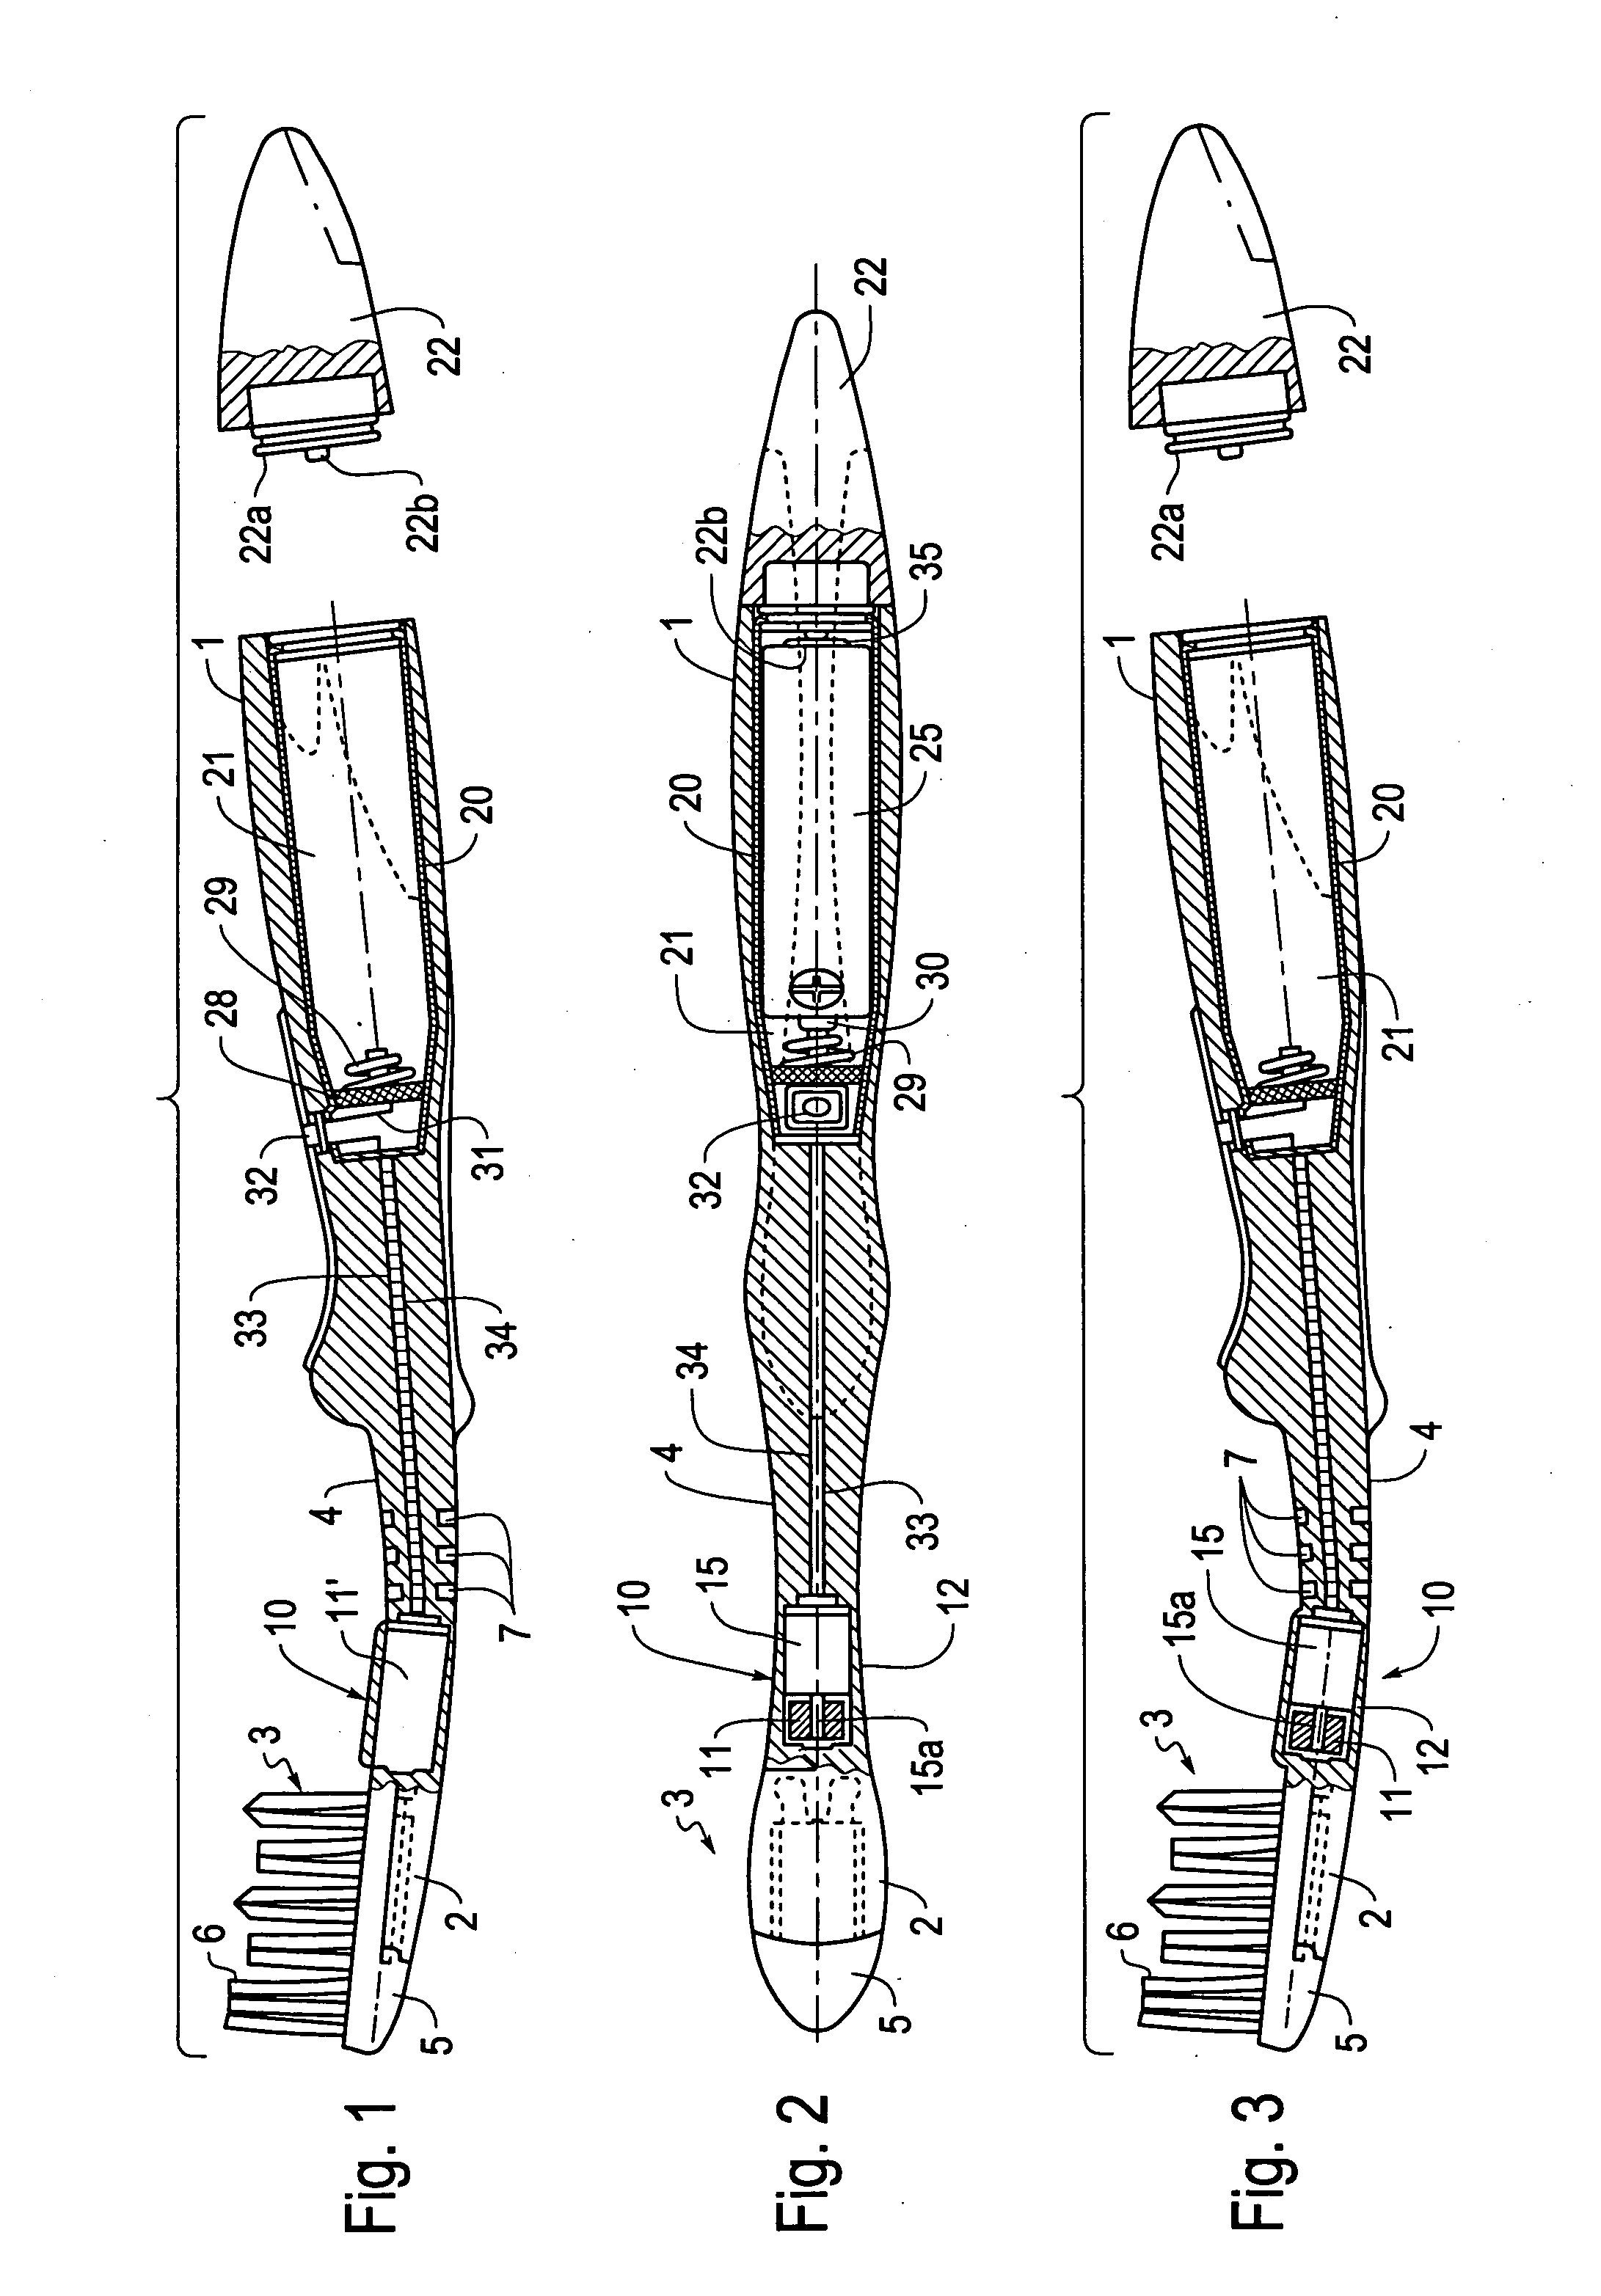 Interdental treatment device with vibrating head part